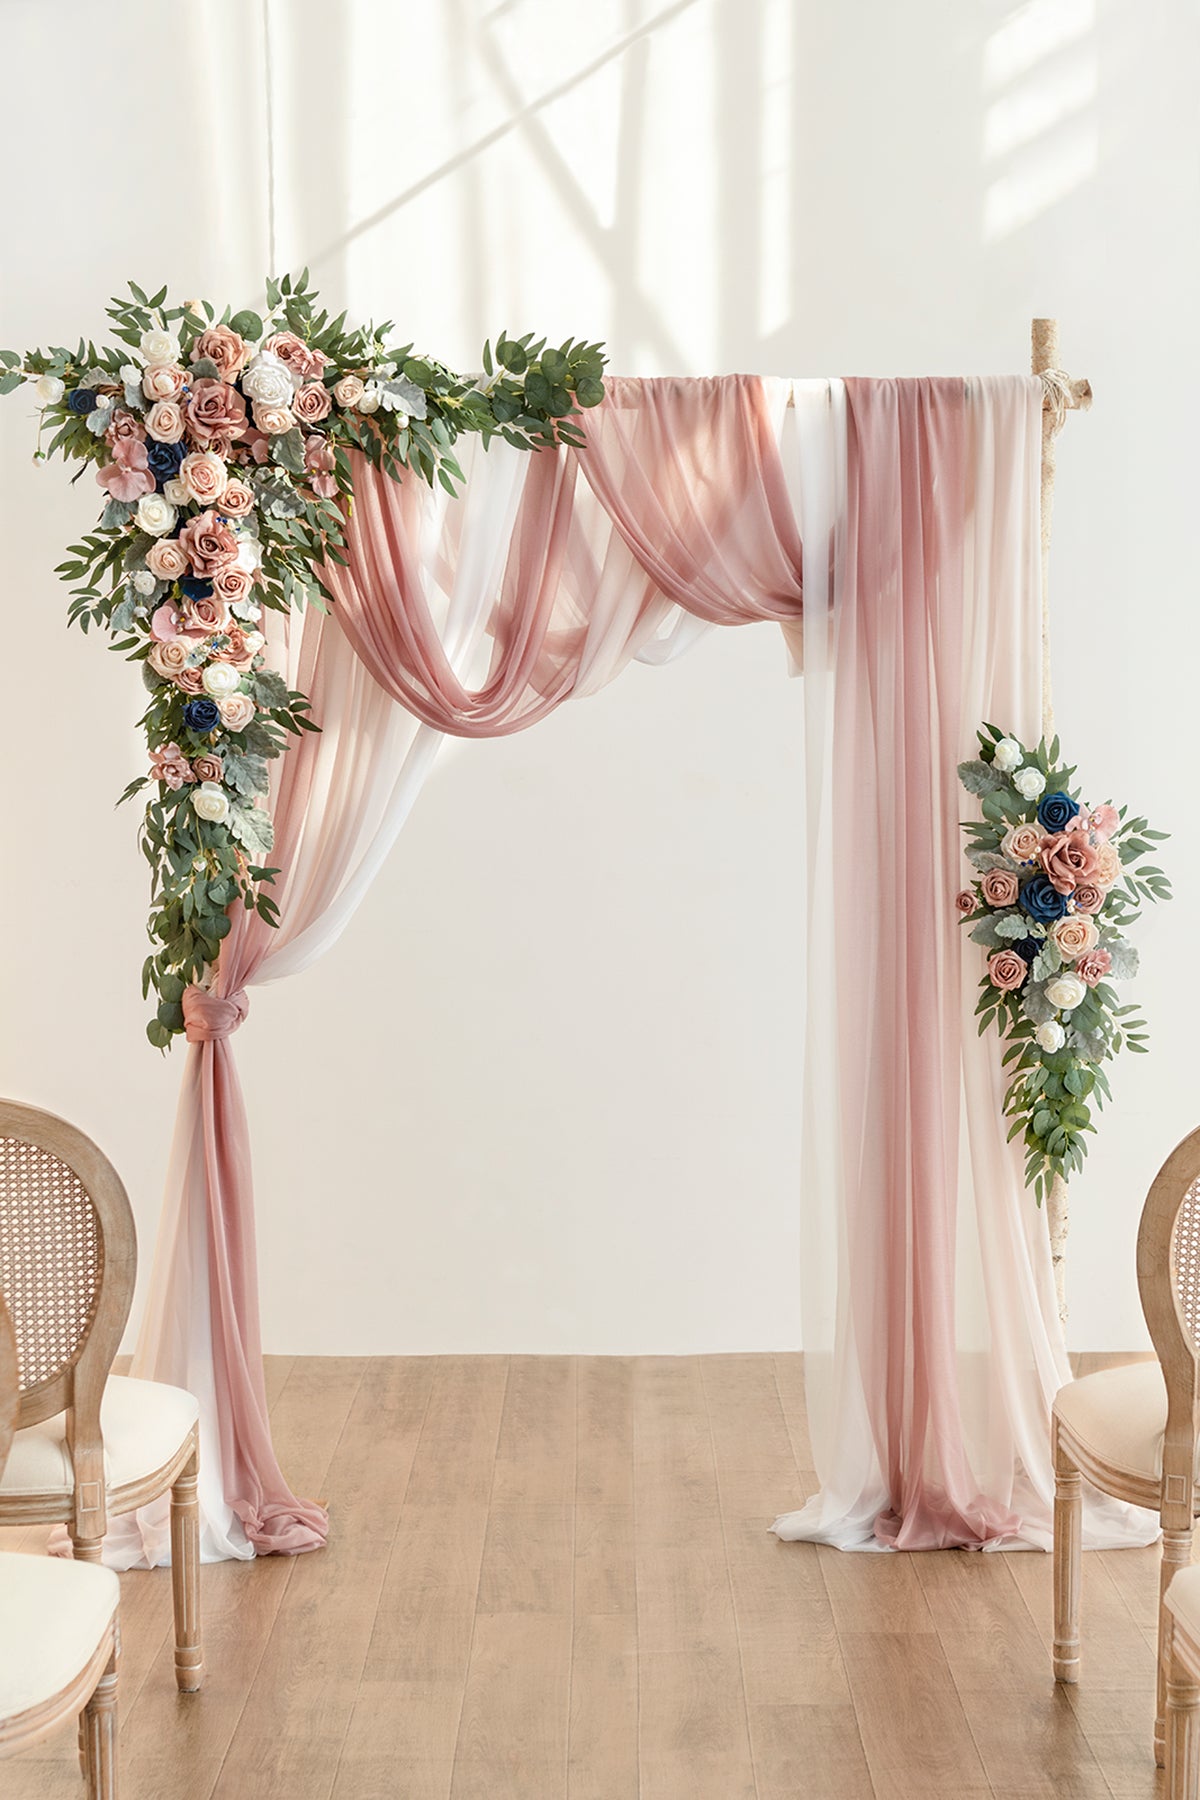 Flower Arch Decor with Drapes in Dusty Rose & Navy | Clearance